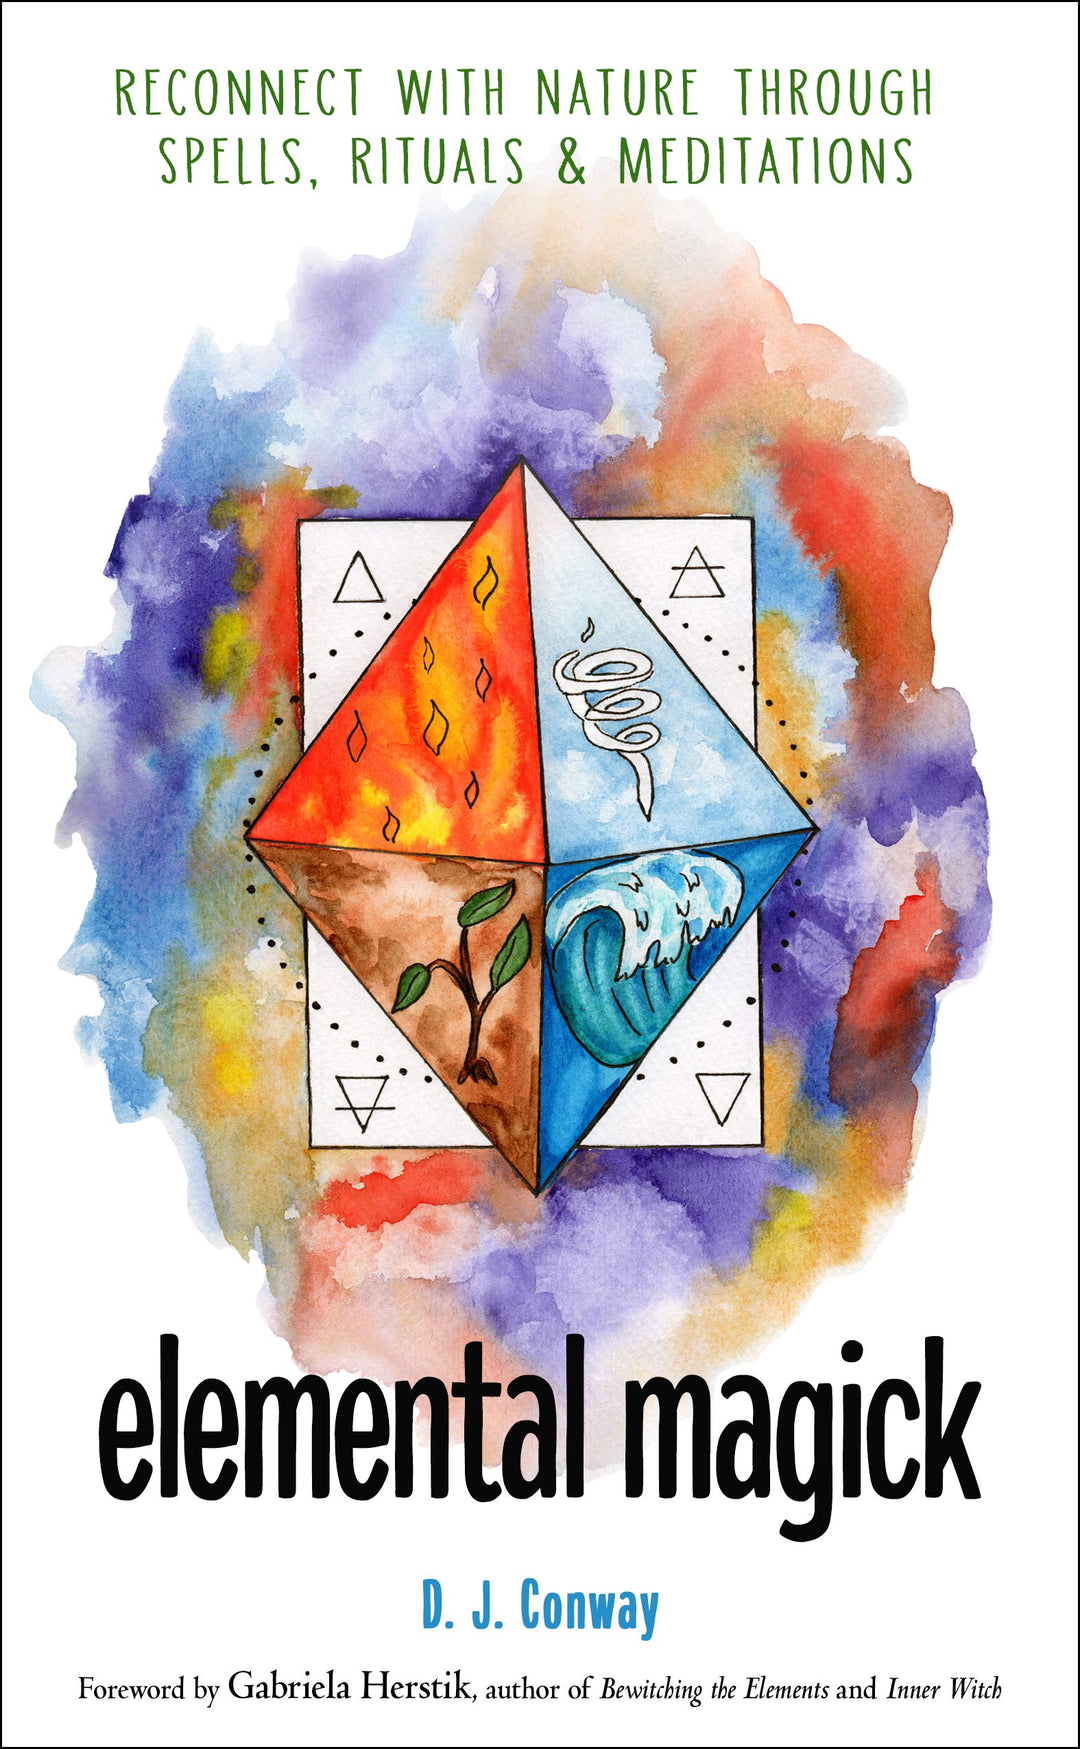 Elemental Magick by D.J. Conway